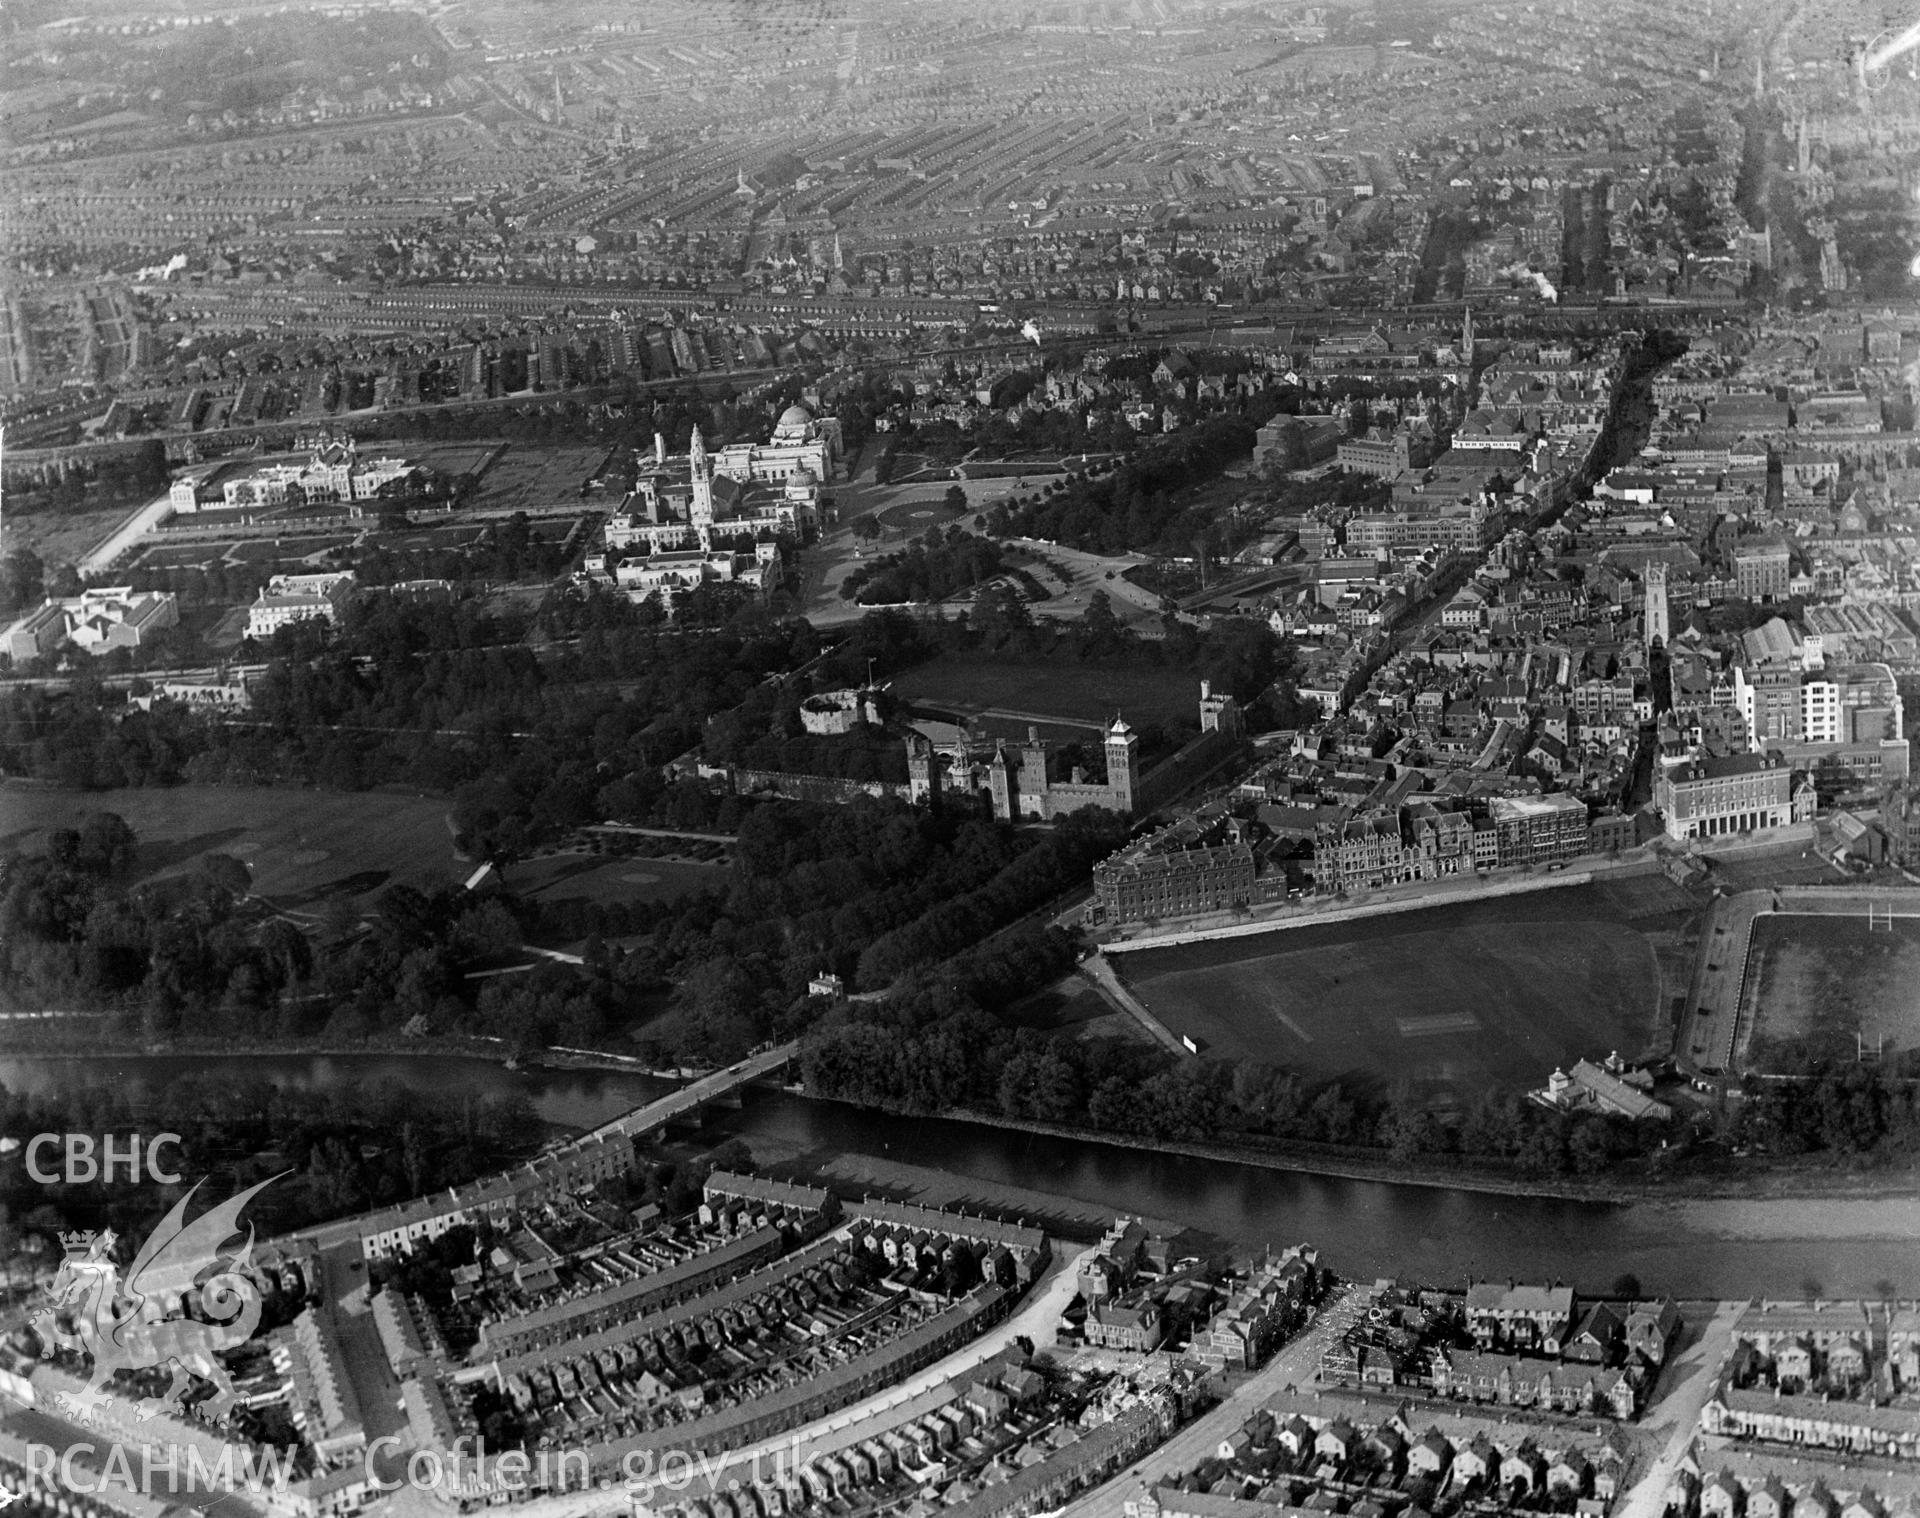 View of Cardiff showing Cathays Park and Civic Centre, oblique aerial view. 5?x4? black and white glass plate negative.